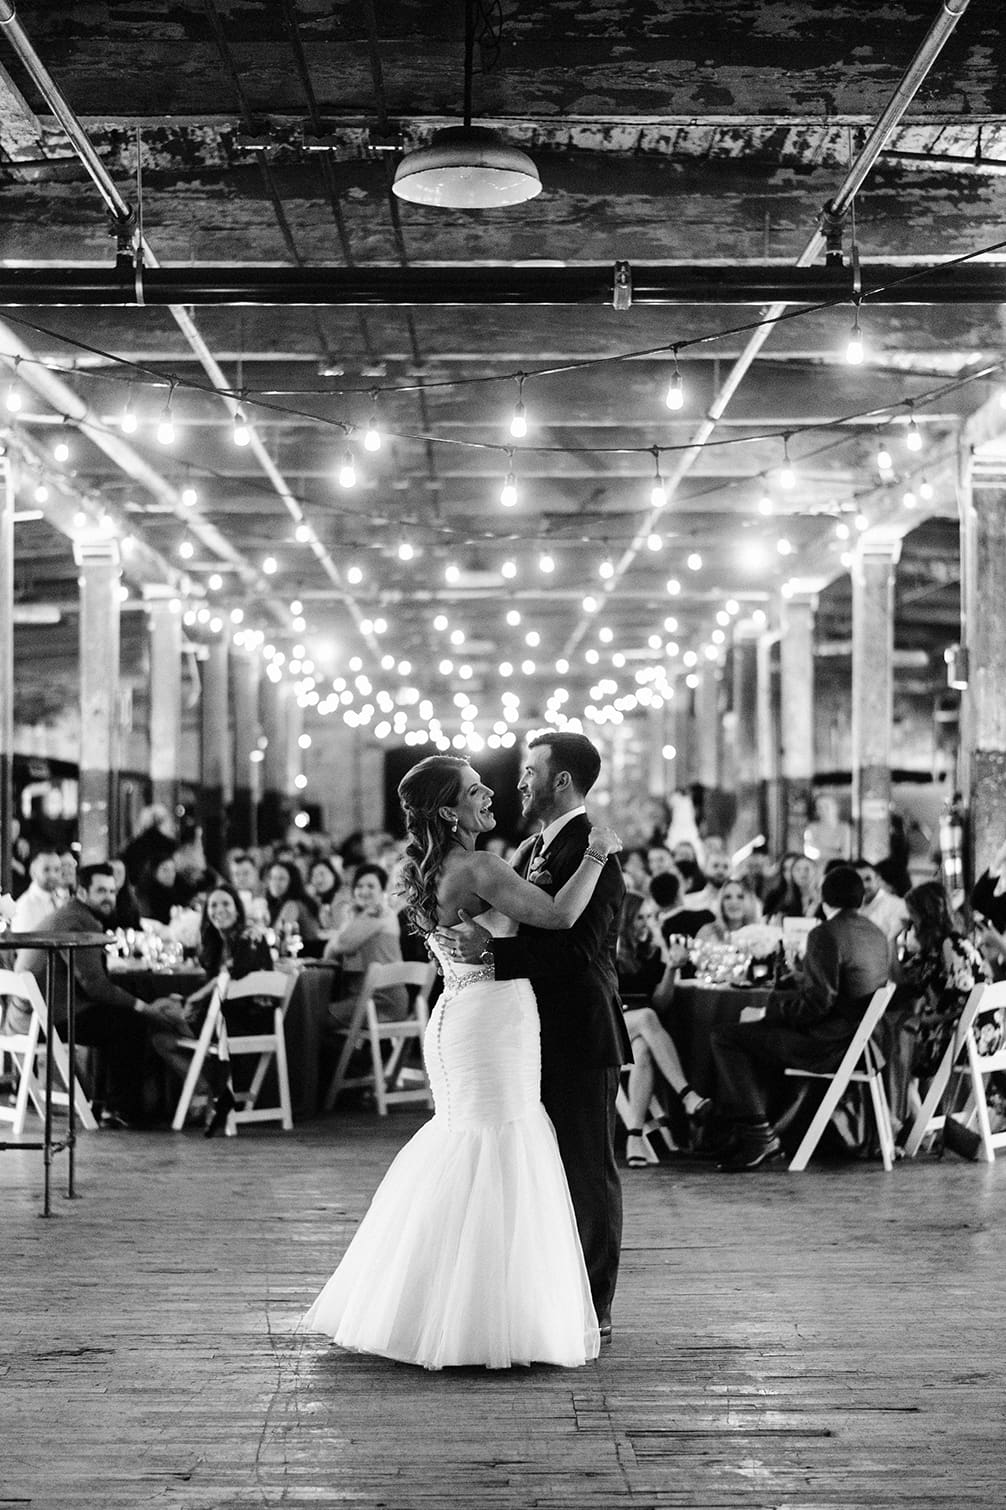 Emily & Jake’s wedding at the Ford Piquette Plant